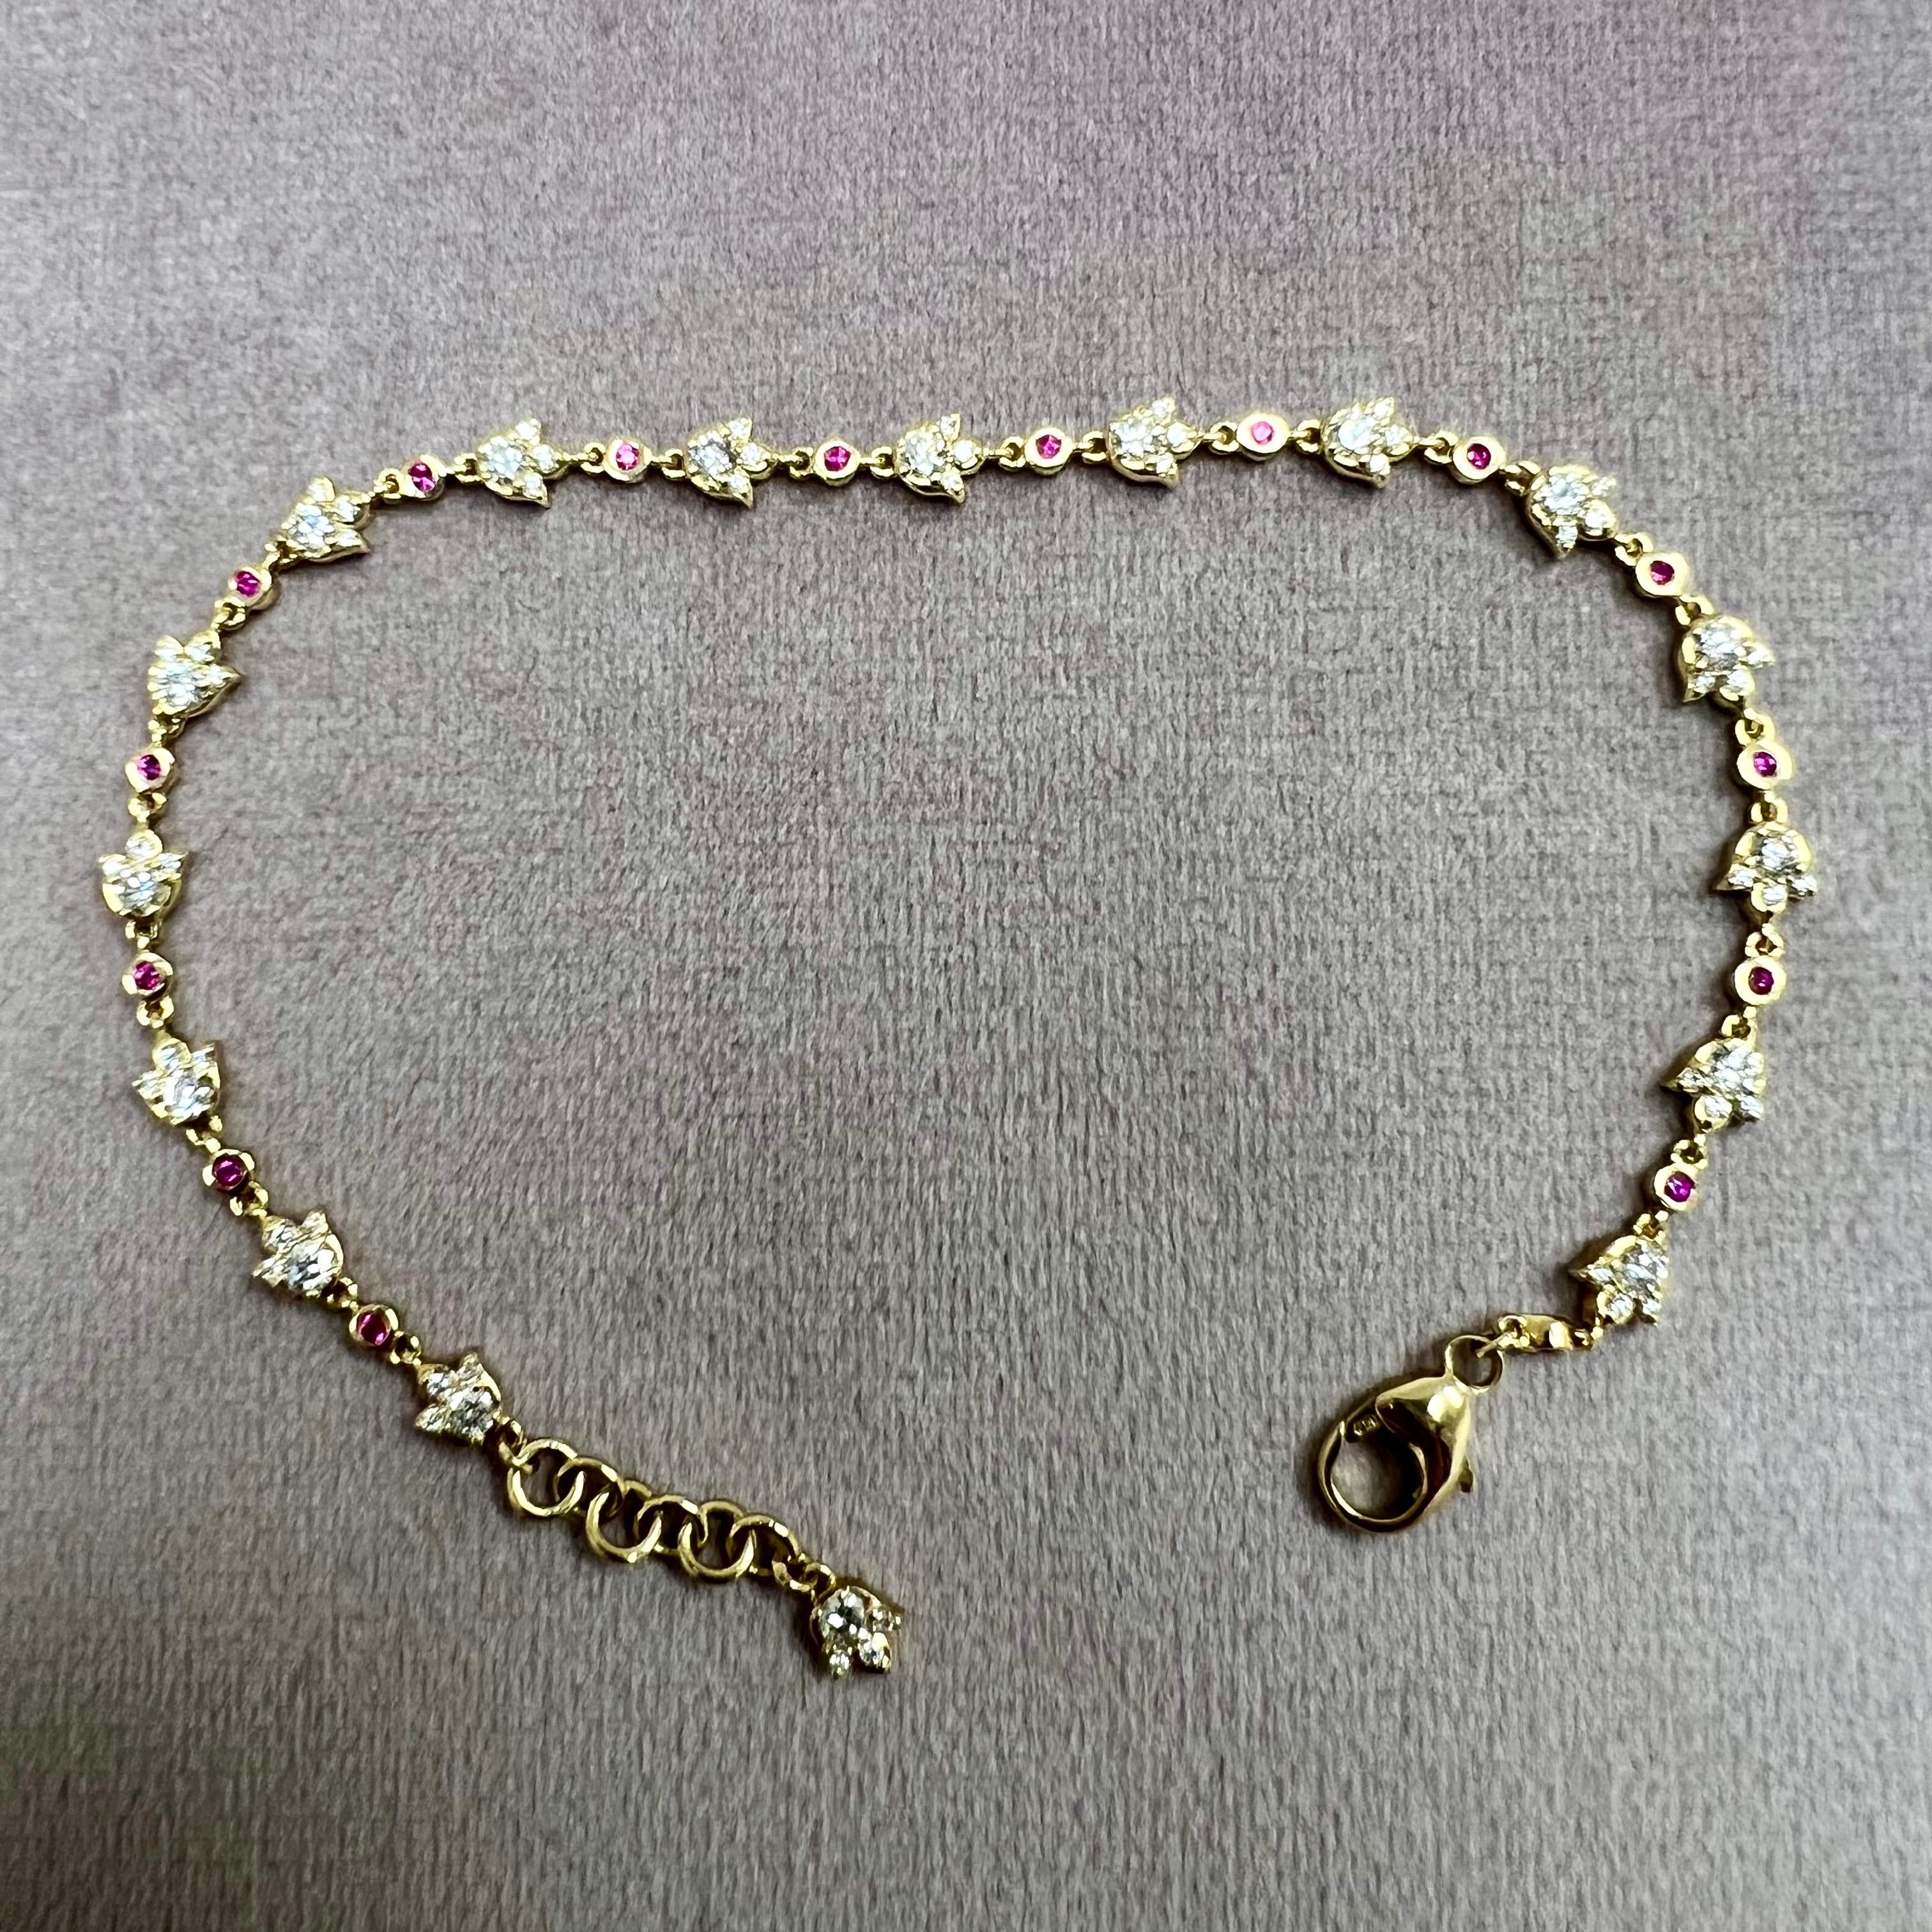 Created in 18 karat yellow gold
Rubies 0.20 carat approx.
Diamonds 1.35 carats approx.
8 inch length with lobster clasp
Bracelet can be clasped at any length
Also available in various lengths

Effortlessly crafted from 18-karat yellow gold, this